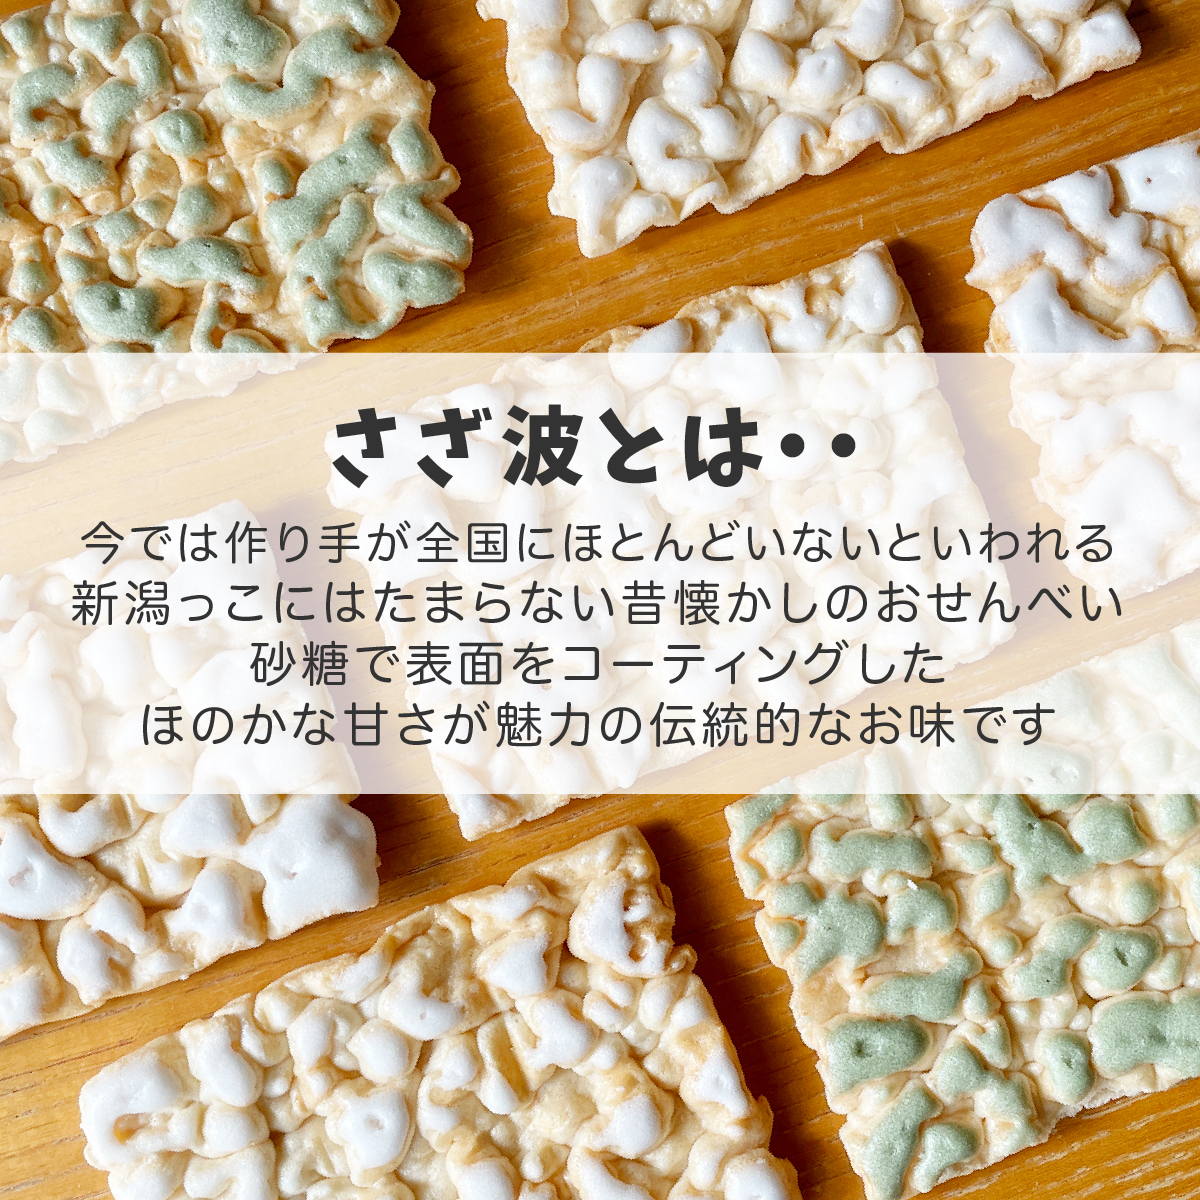  free shipping .. confectionery domestic production rice use plain powdered green tea .. wave 9 sheets entering . mochi rice cracker rice . missed taste Niigata 